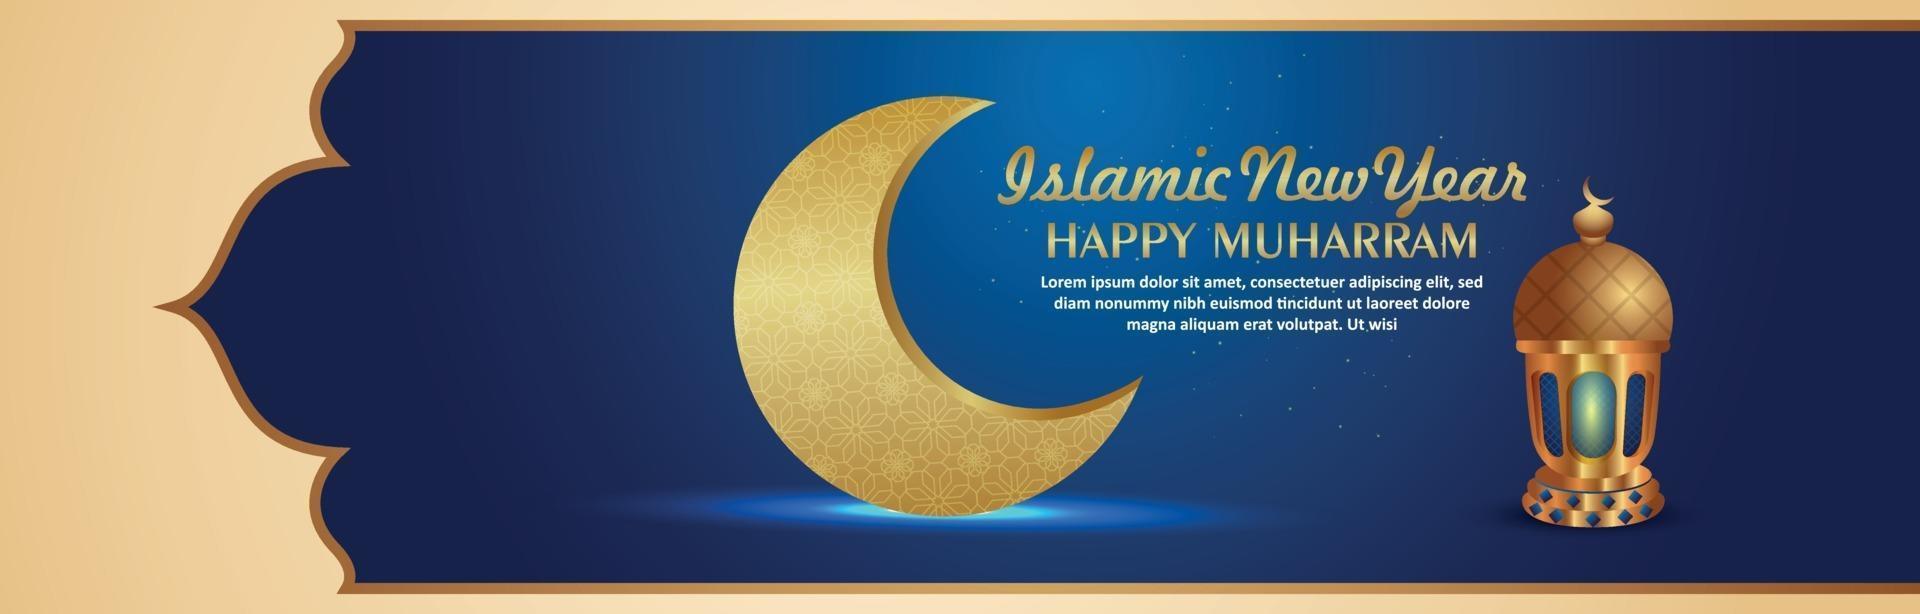 Islamic new year or happy muharram with golden moon and lantern vector